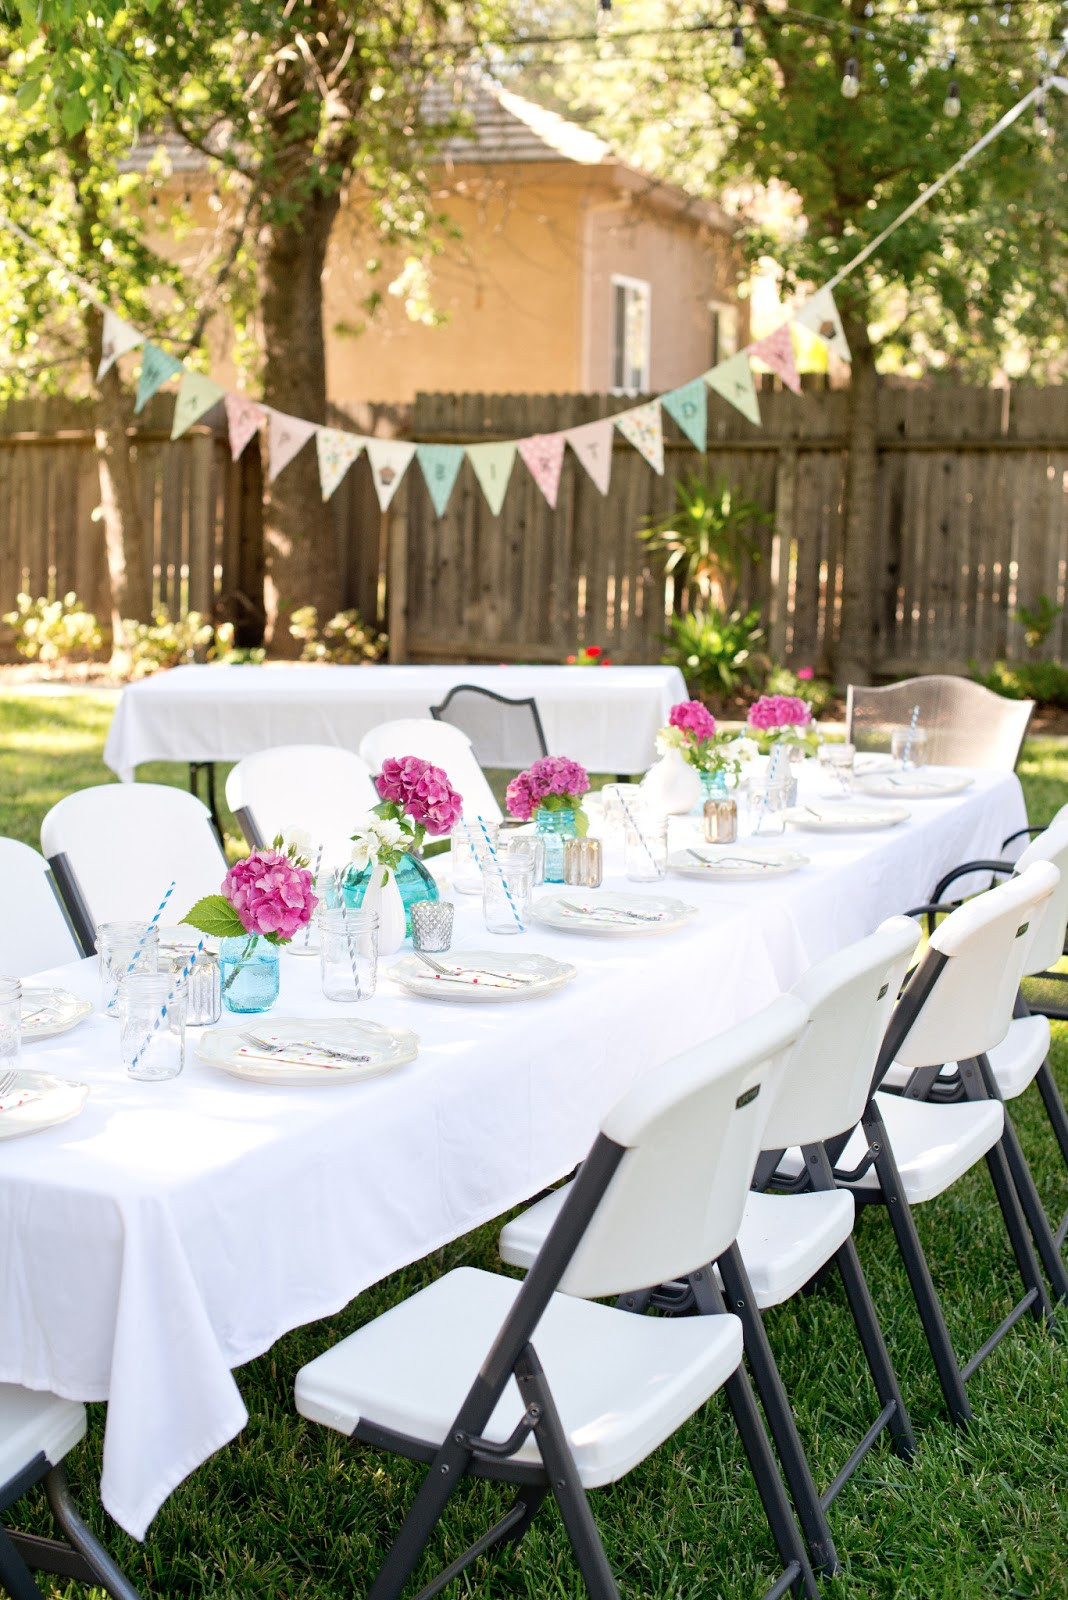 Graduation Backyard Party Ideas
 Backyard Party Decorations For Unfor table Moments